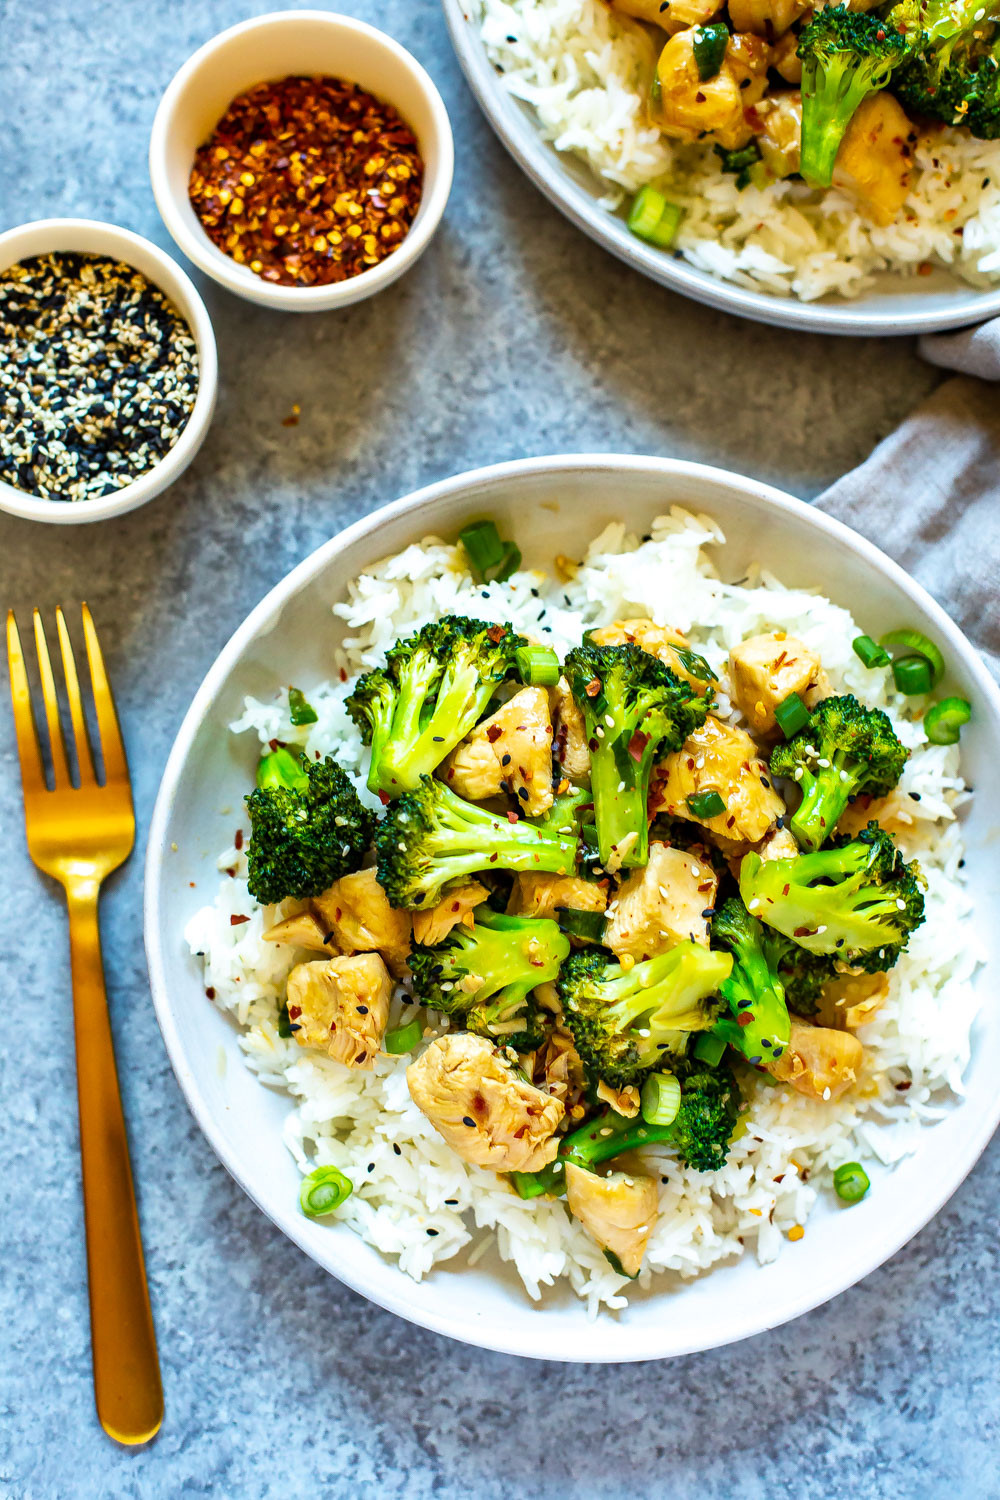 Chinese Chicken And Broccoli Recipes
 Instant Pot Chinese Chicken and Broccoli Eating Instantly